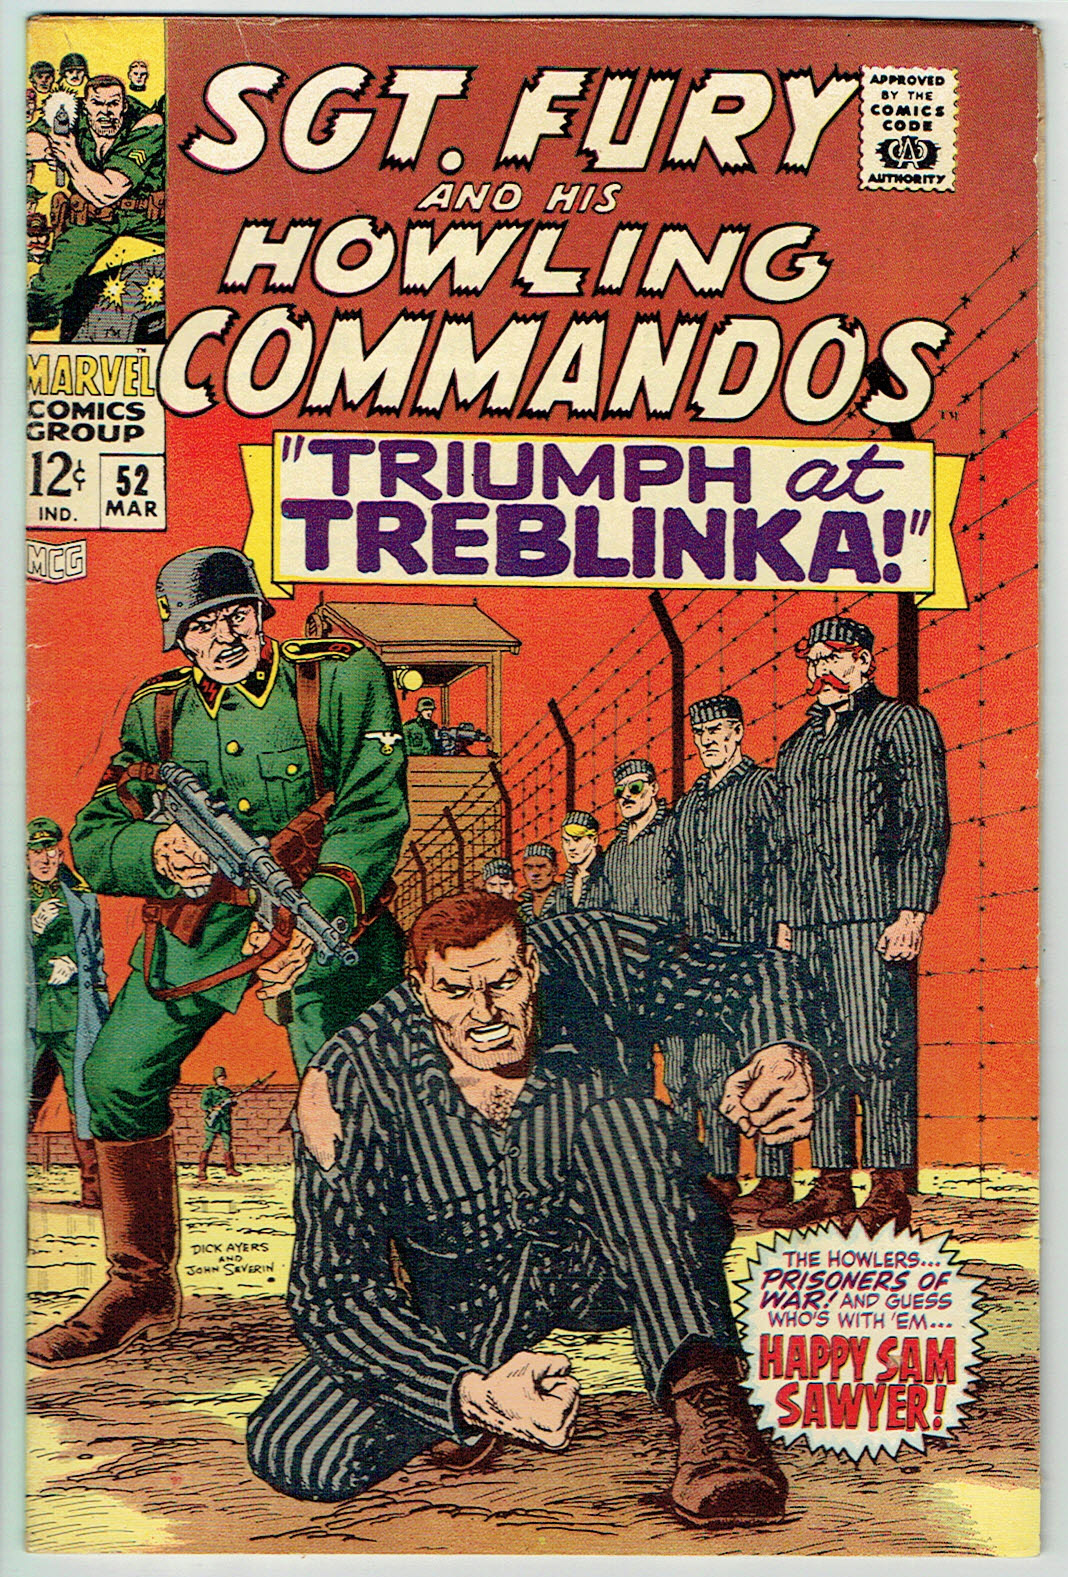 Sgt. Fury and his Howling Commandos  #52